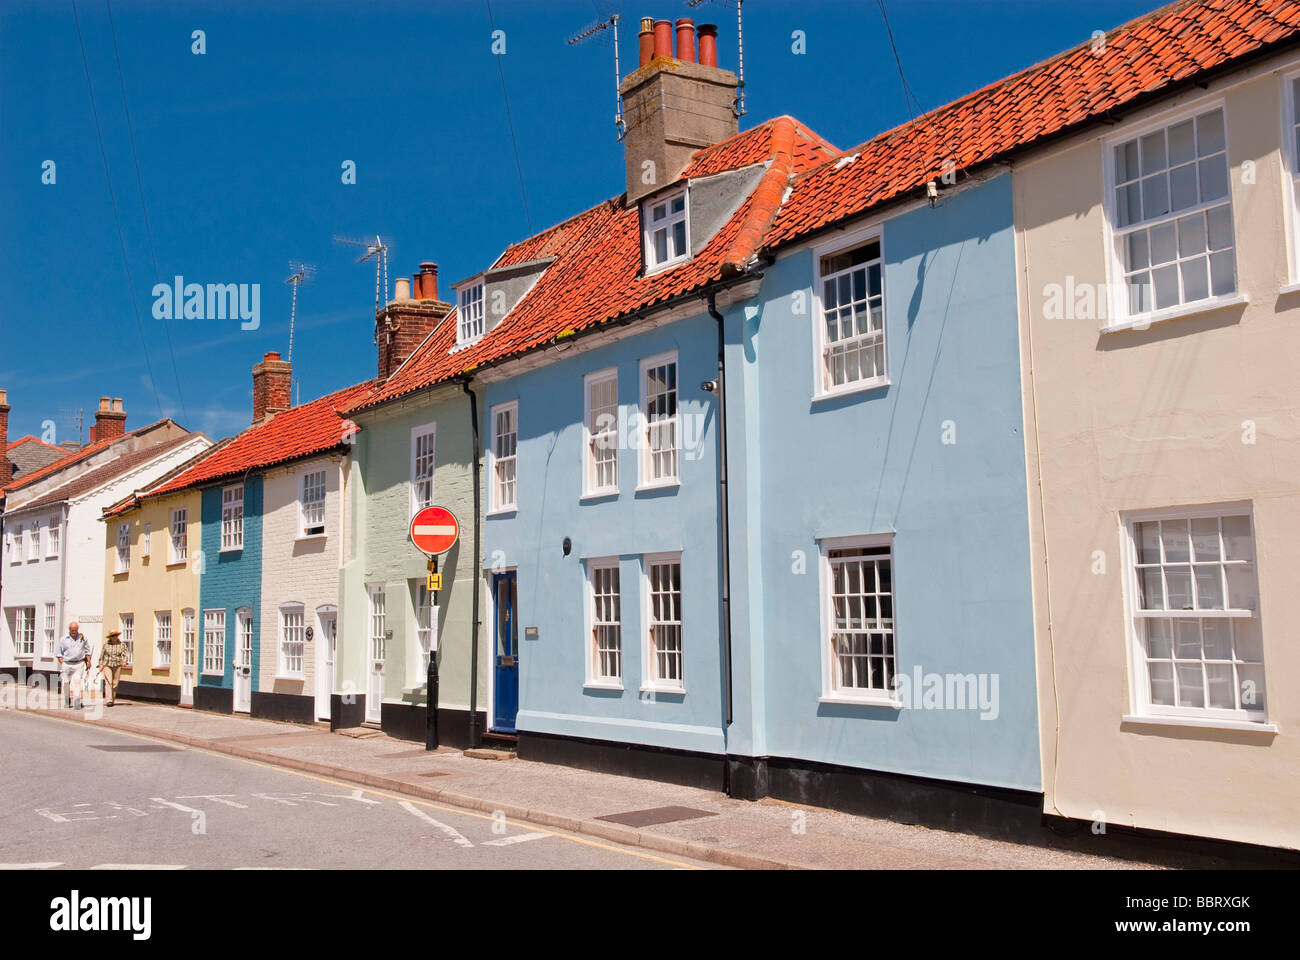 A View Of A Row Of Pretty Terraced Colourful Houses In The Seaside